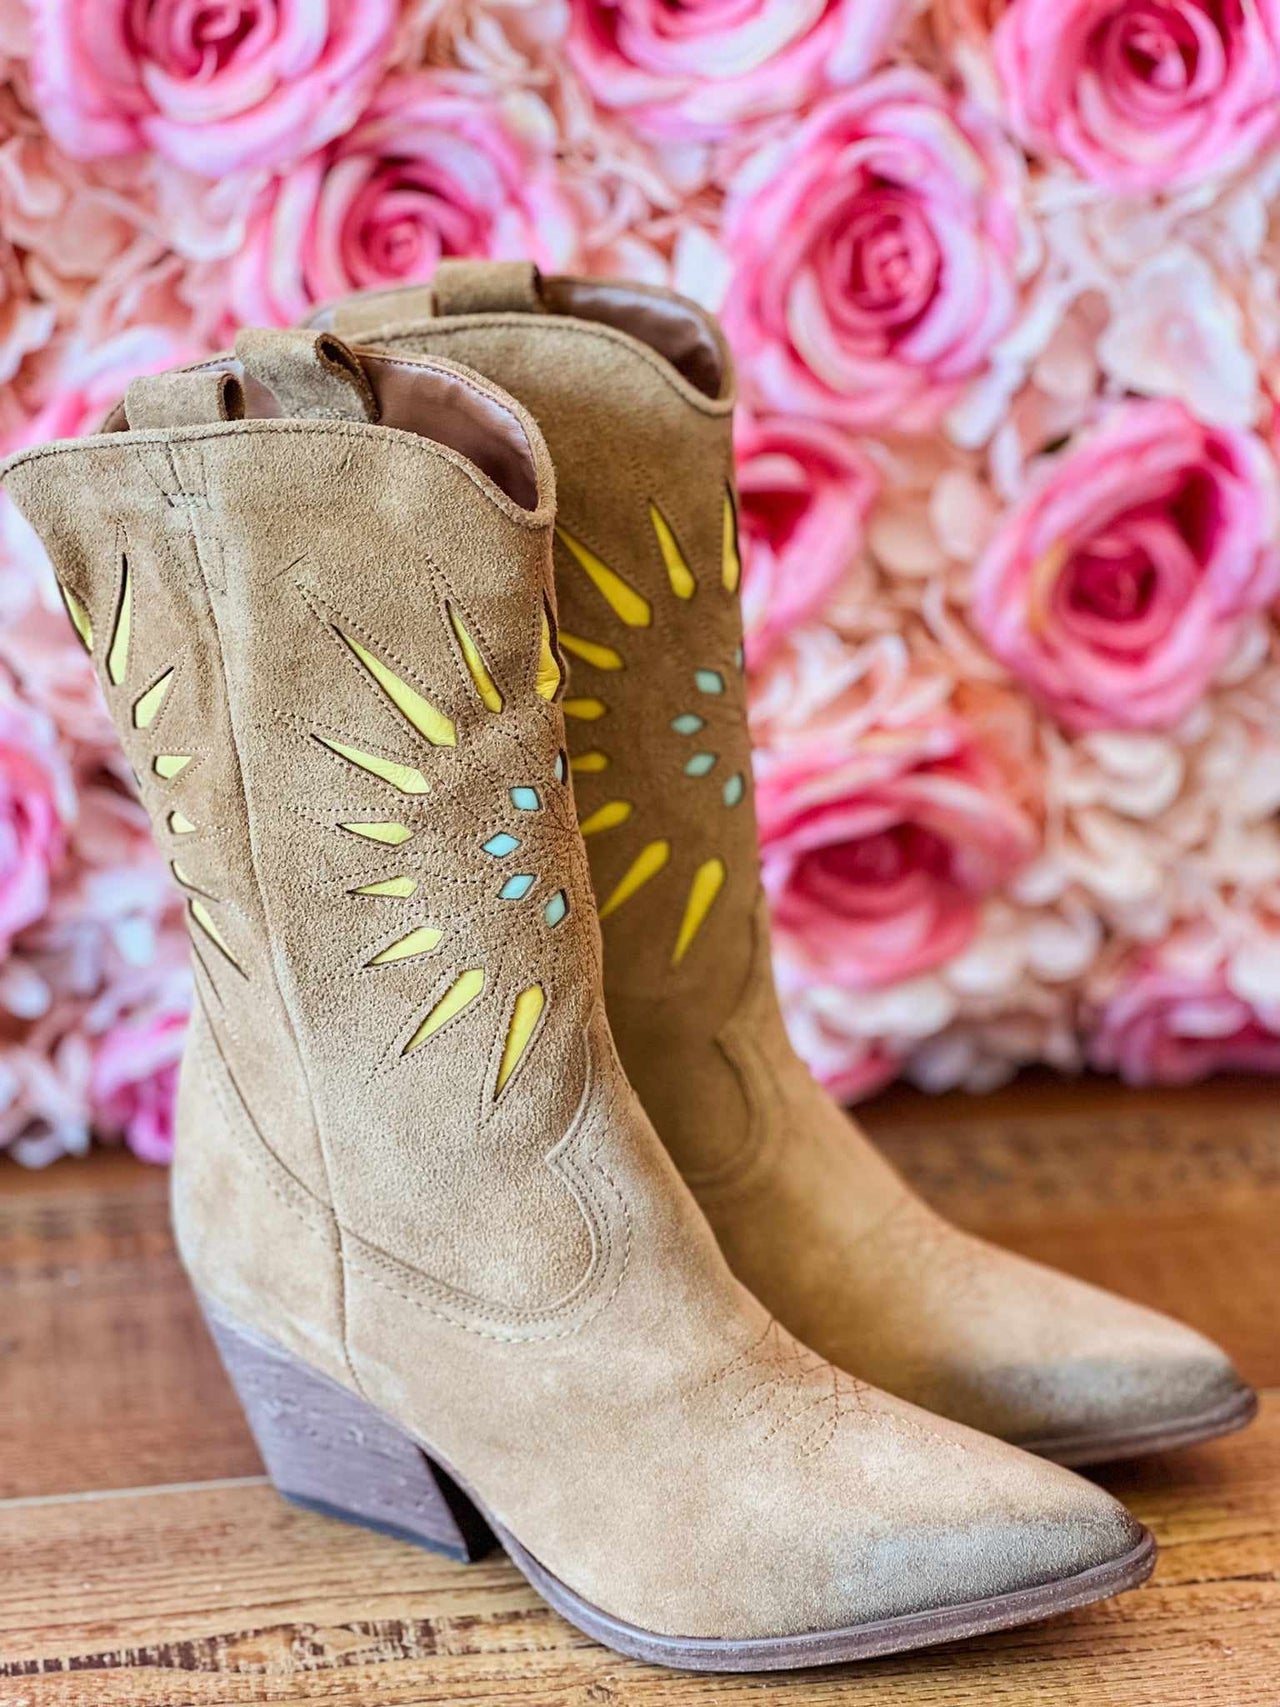 Brown suede short western boots with yellow and turquoise starburst pattern cutouts.